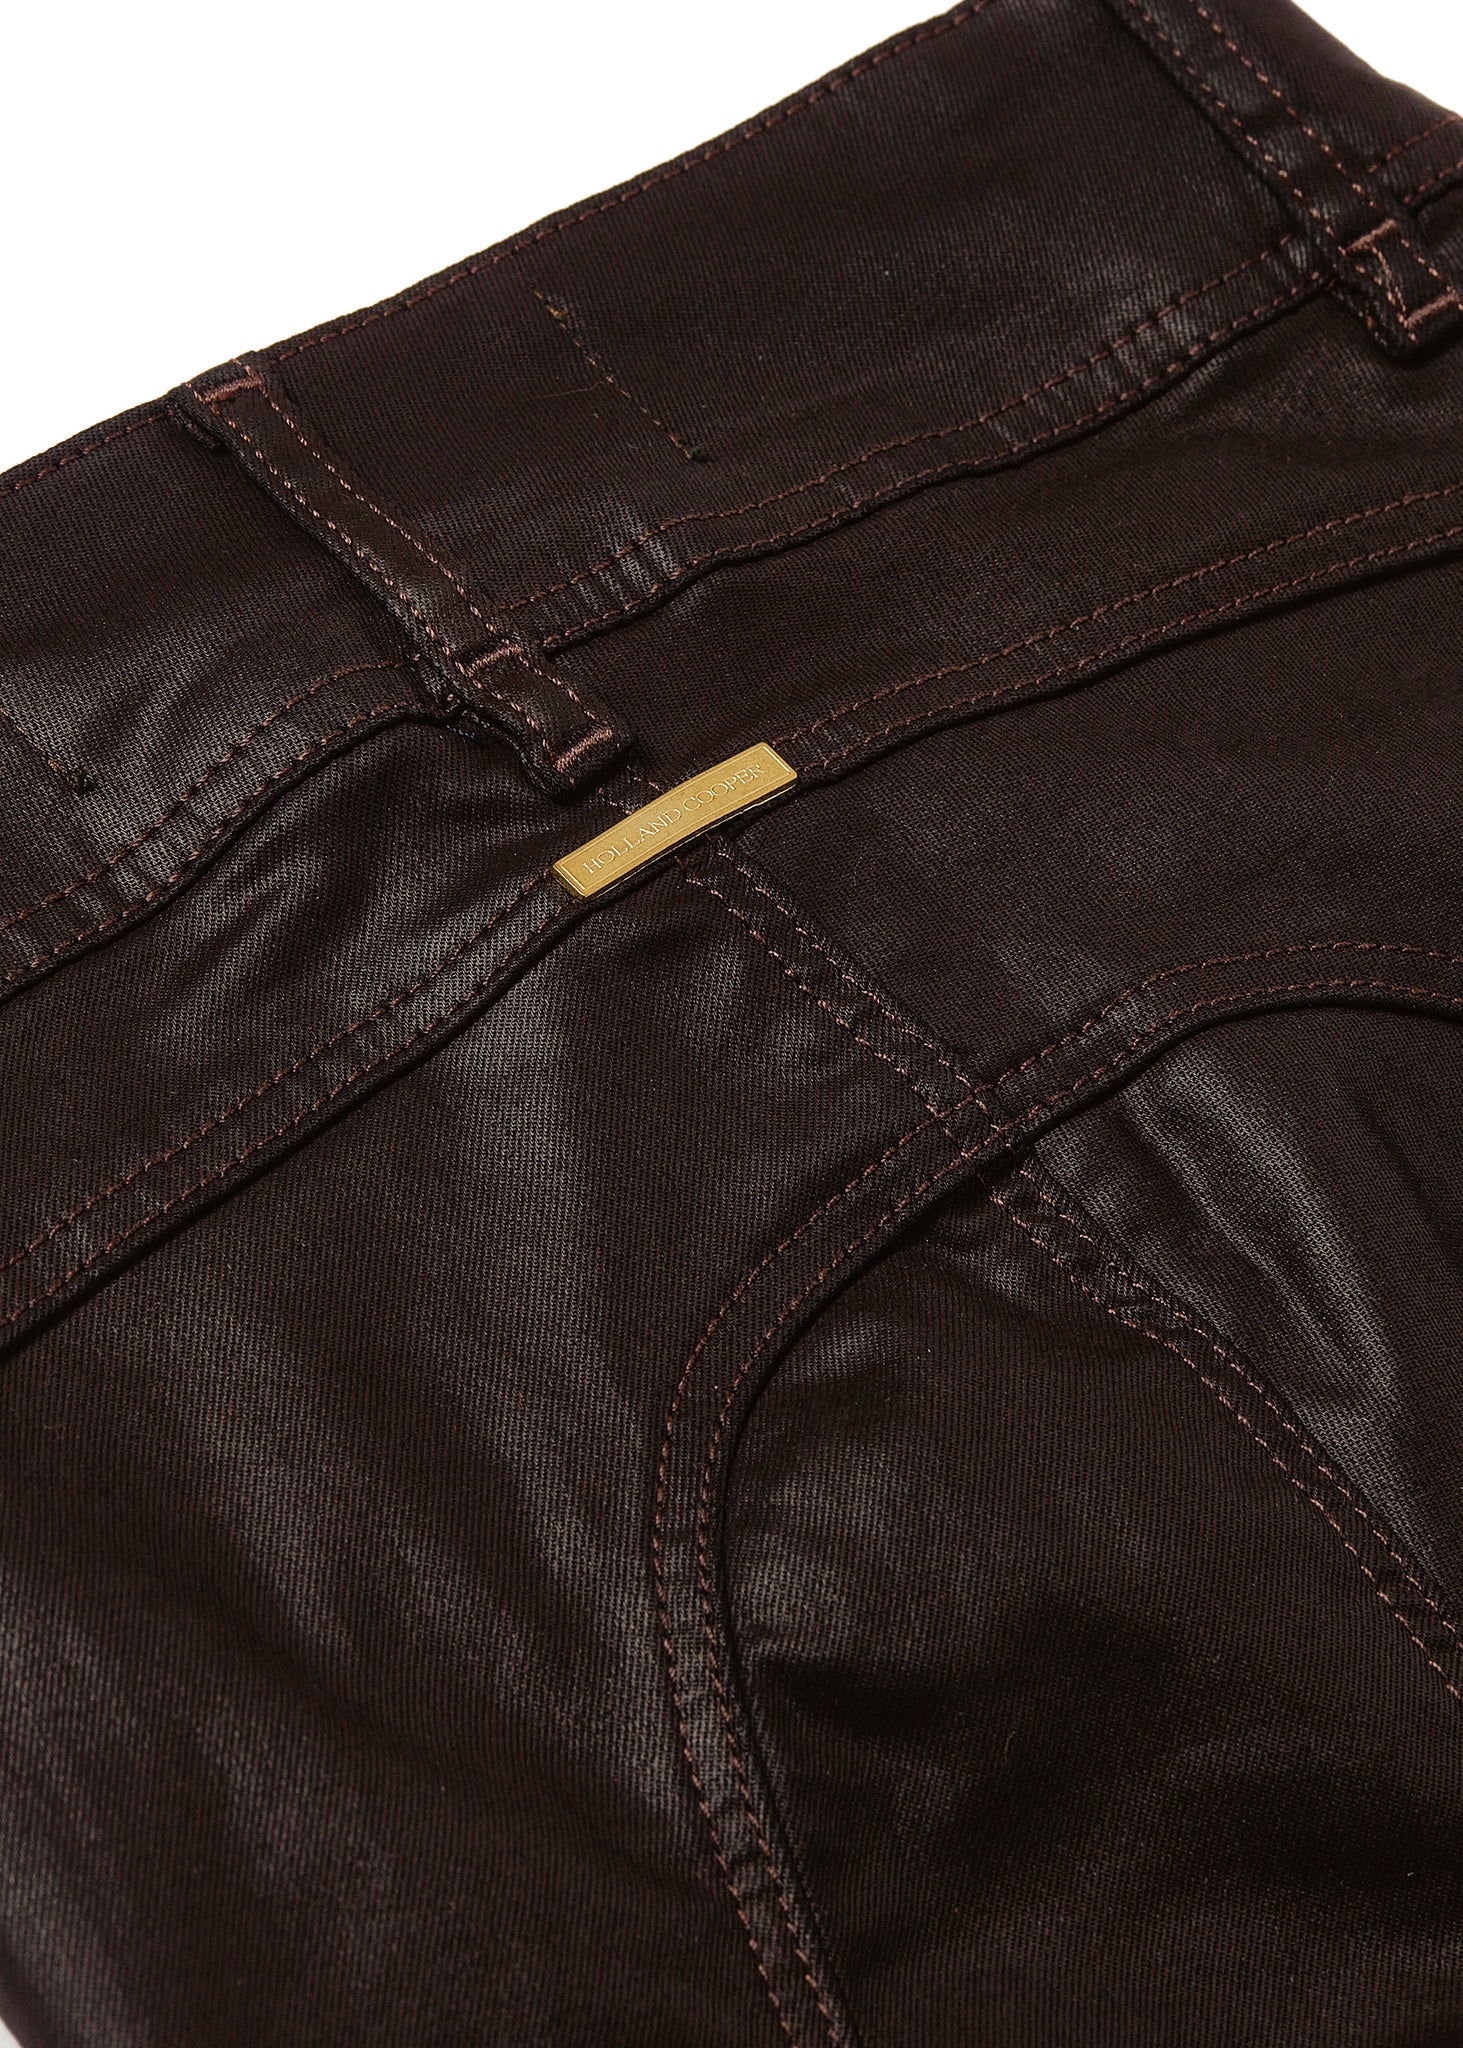 gold hardware detail on back of womens high rise brown coated skinny jean for a waxed look with jodhpur style seams and two open zip pockets to the front with HC branded pulls